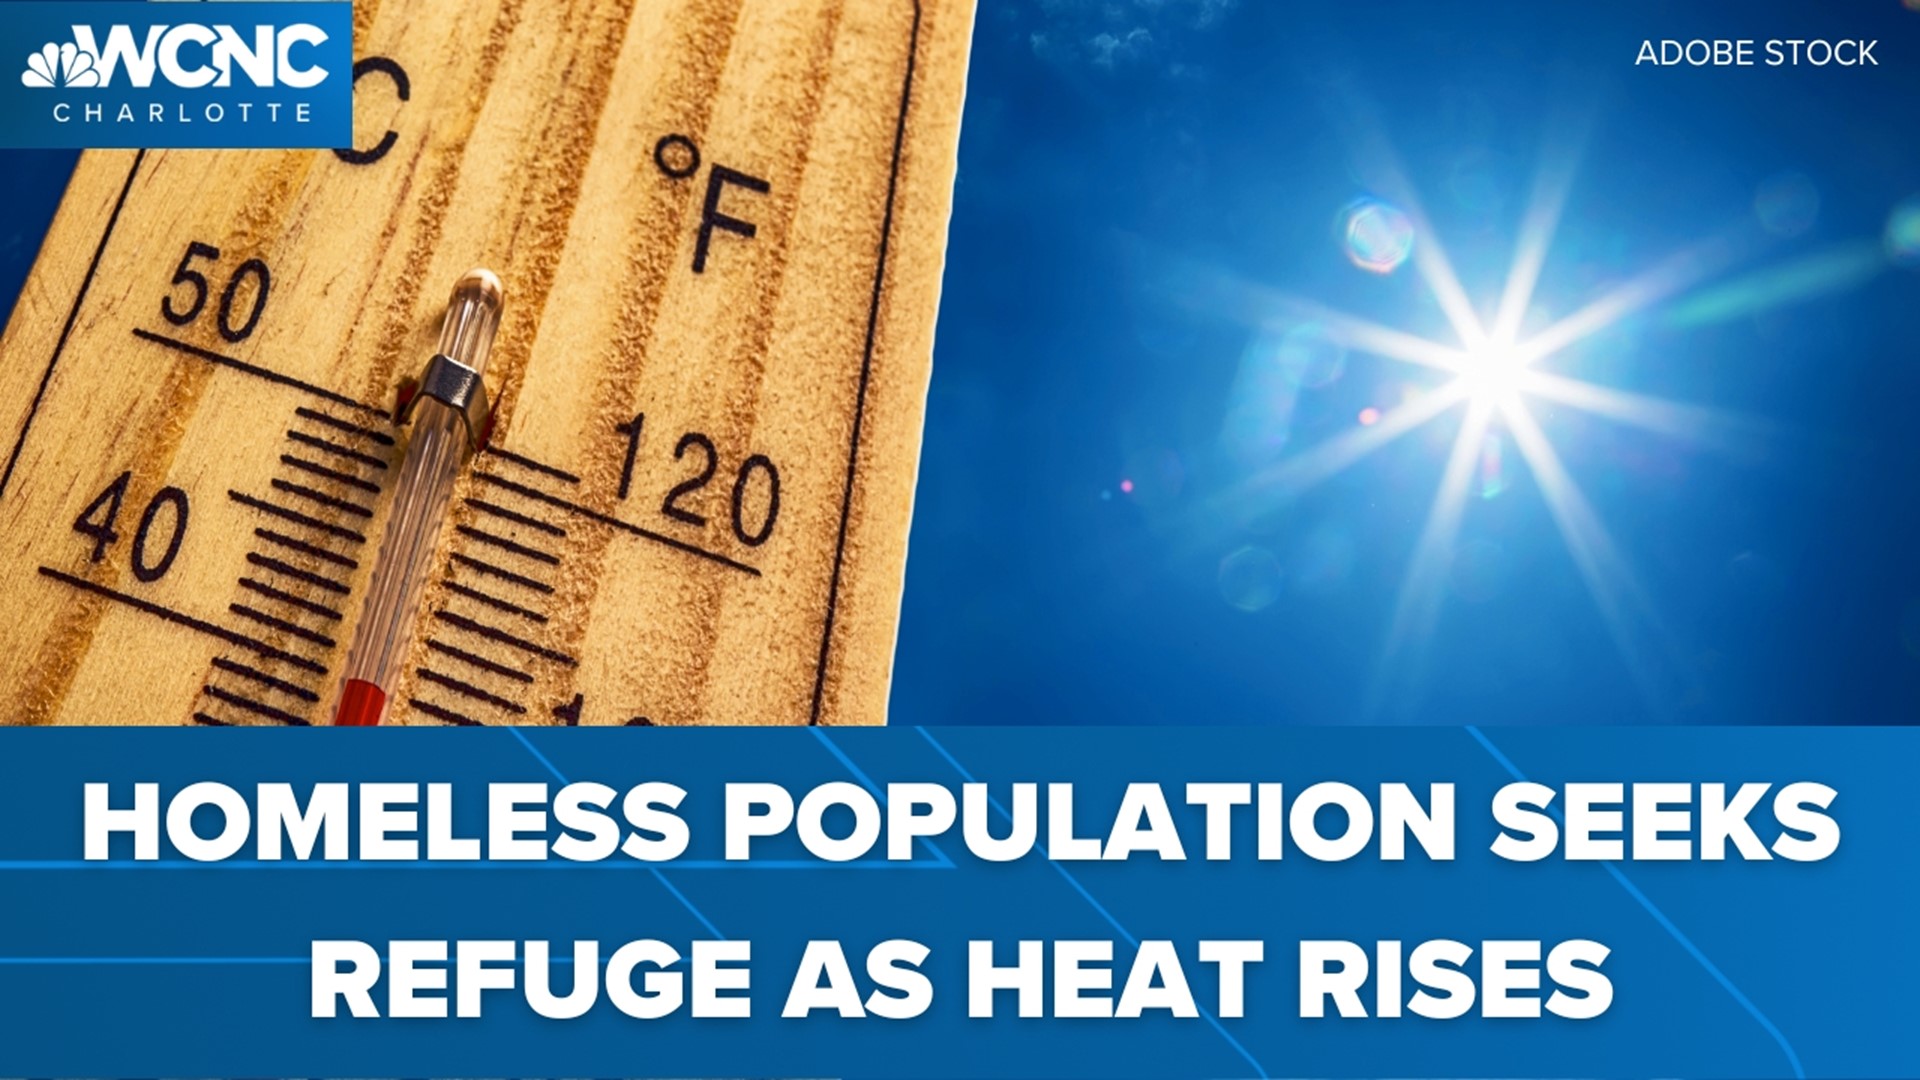 With temperatures dangerously high this week, WCNC's Indira Eskieva takes us inside a shelter that's giving people a place to escape the swelter.